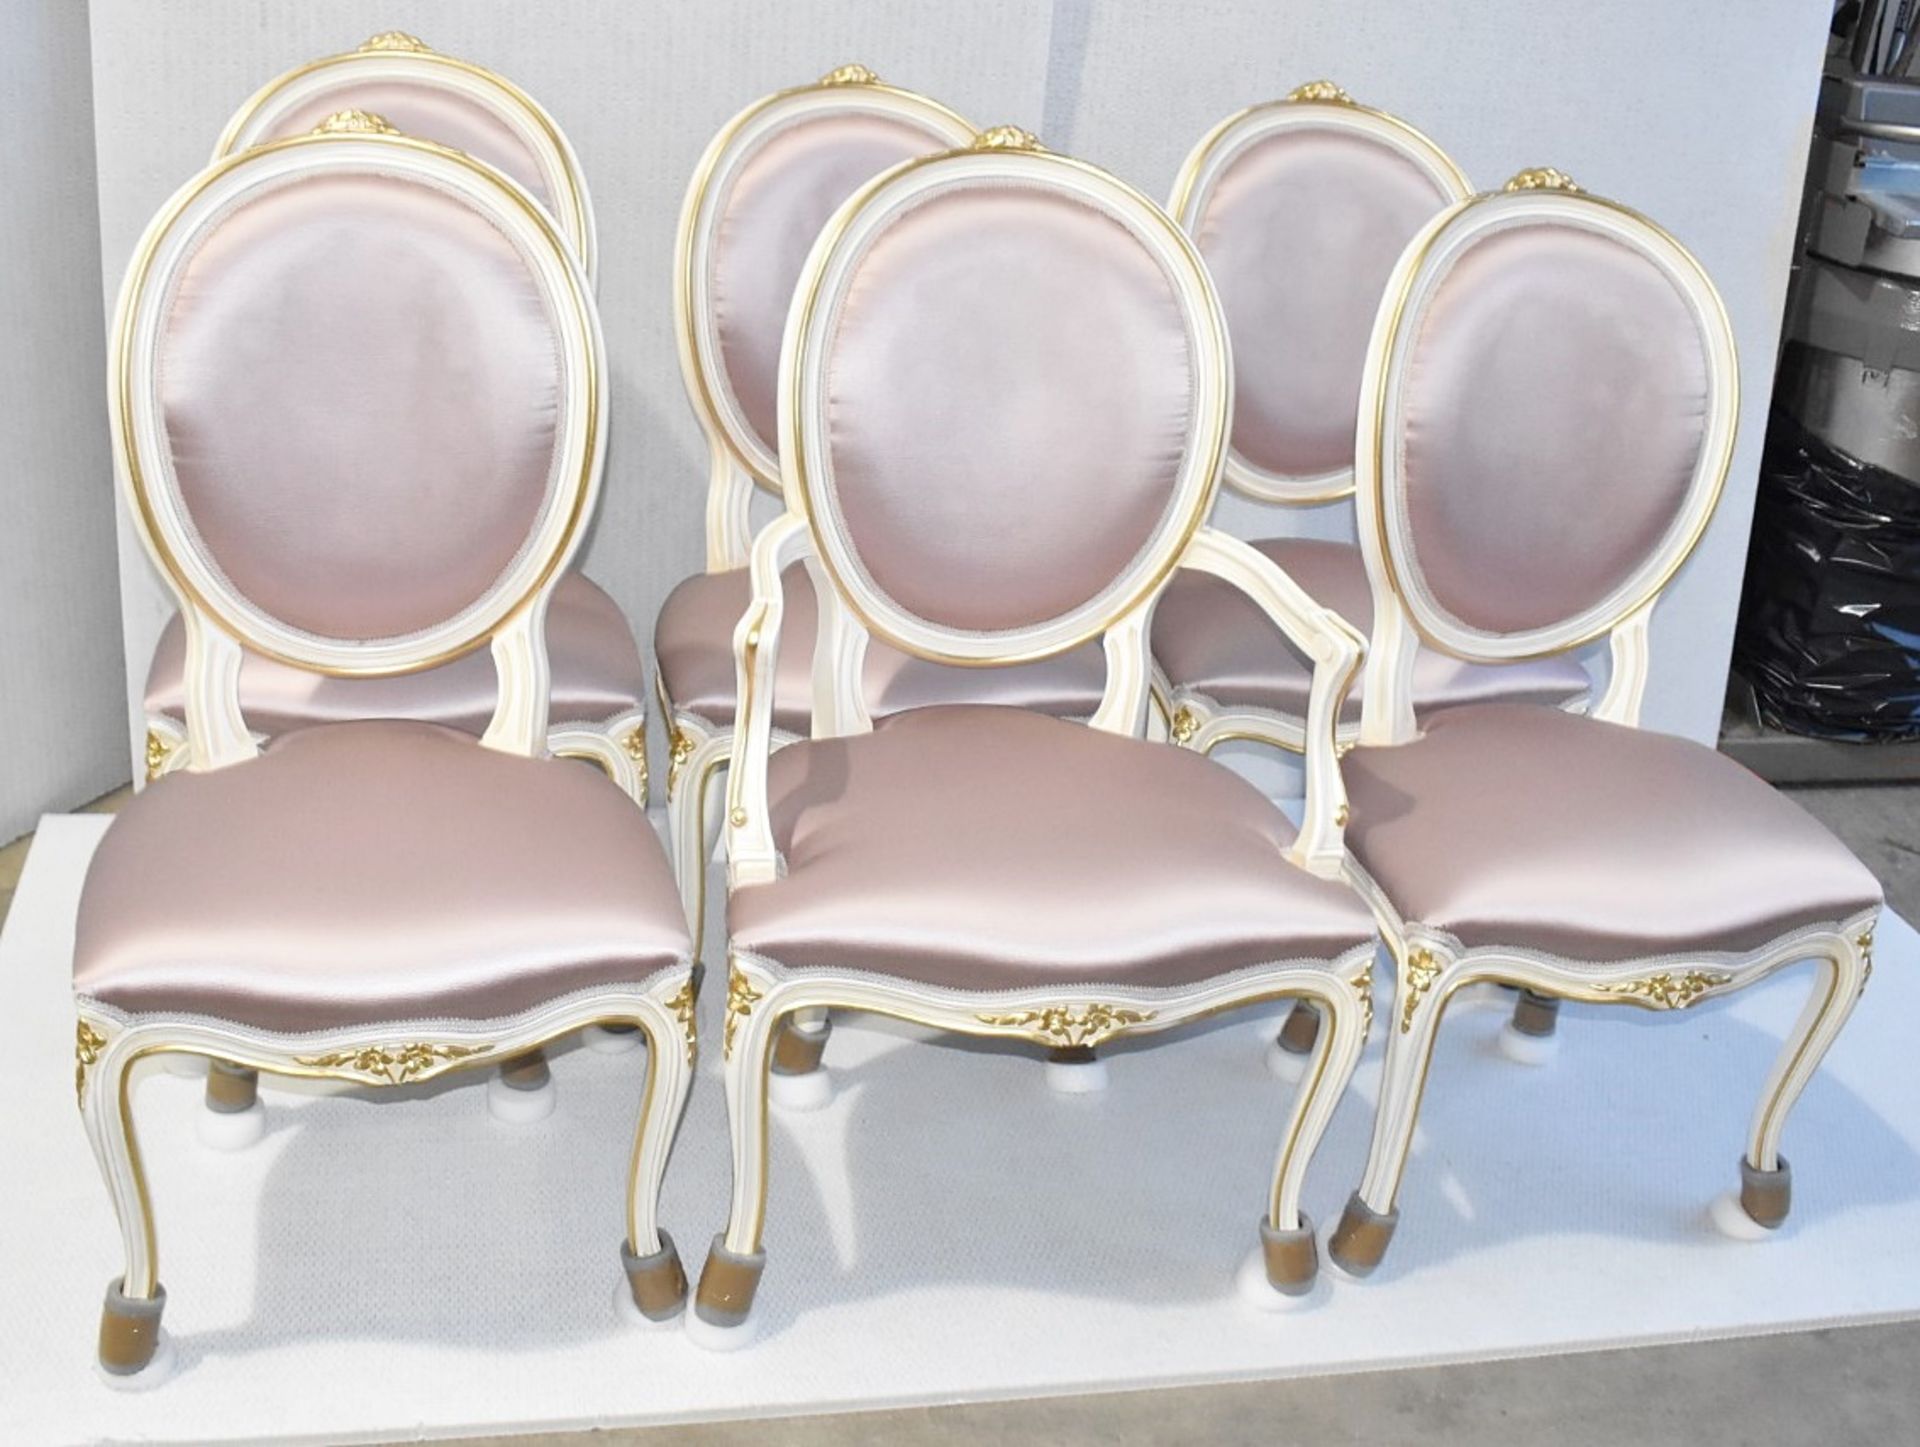 Set of 6 x ANGELO CAPPELLINI 'Timeless' Baroque-style Carved Dining Chairs, Upholstered in Pink Silk - Image 2 of 15